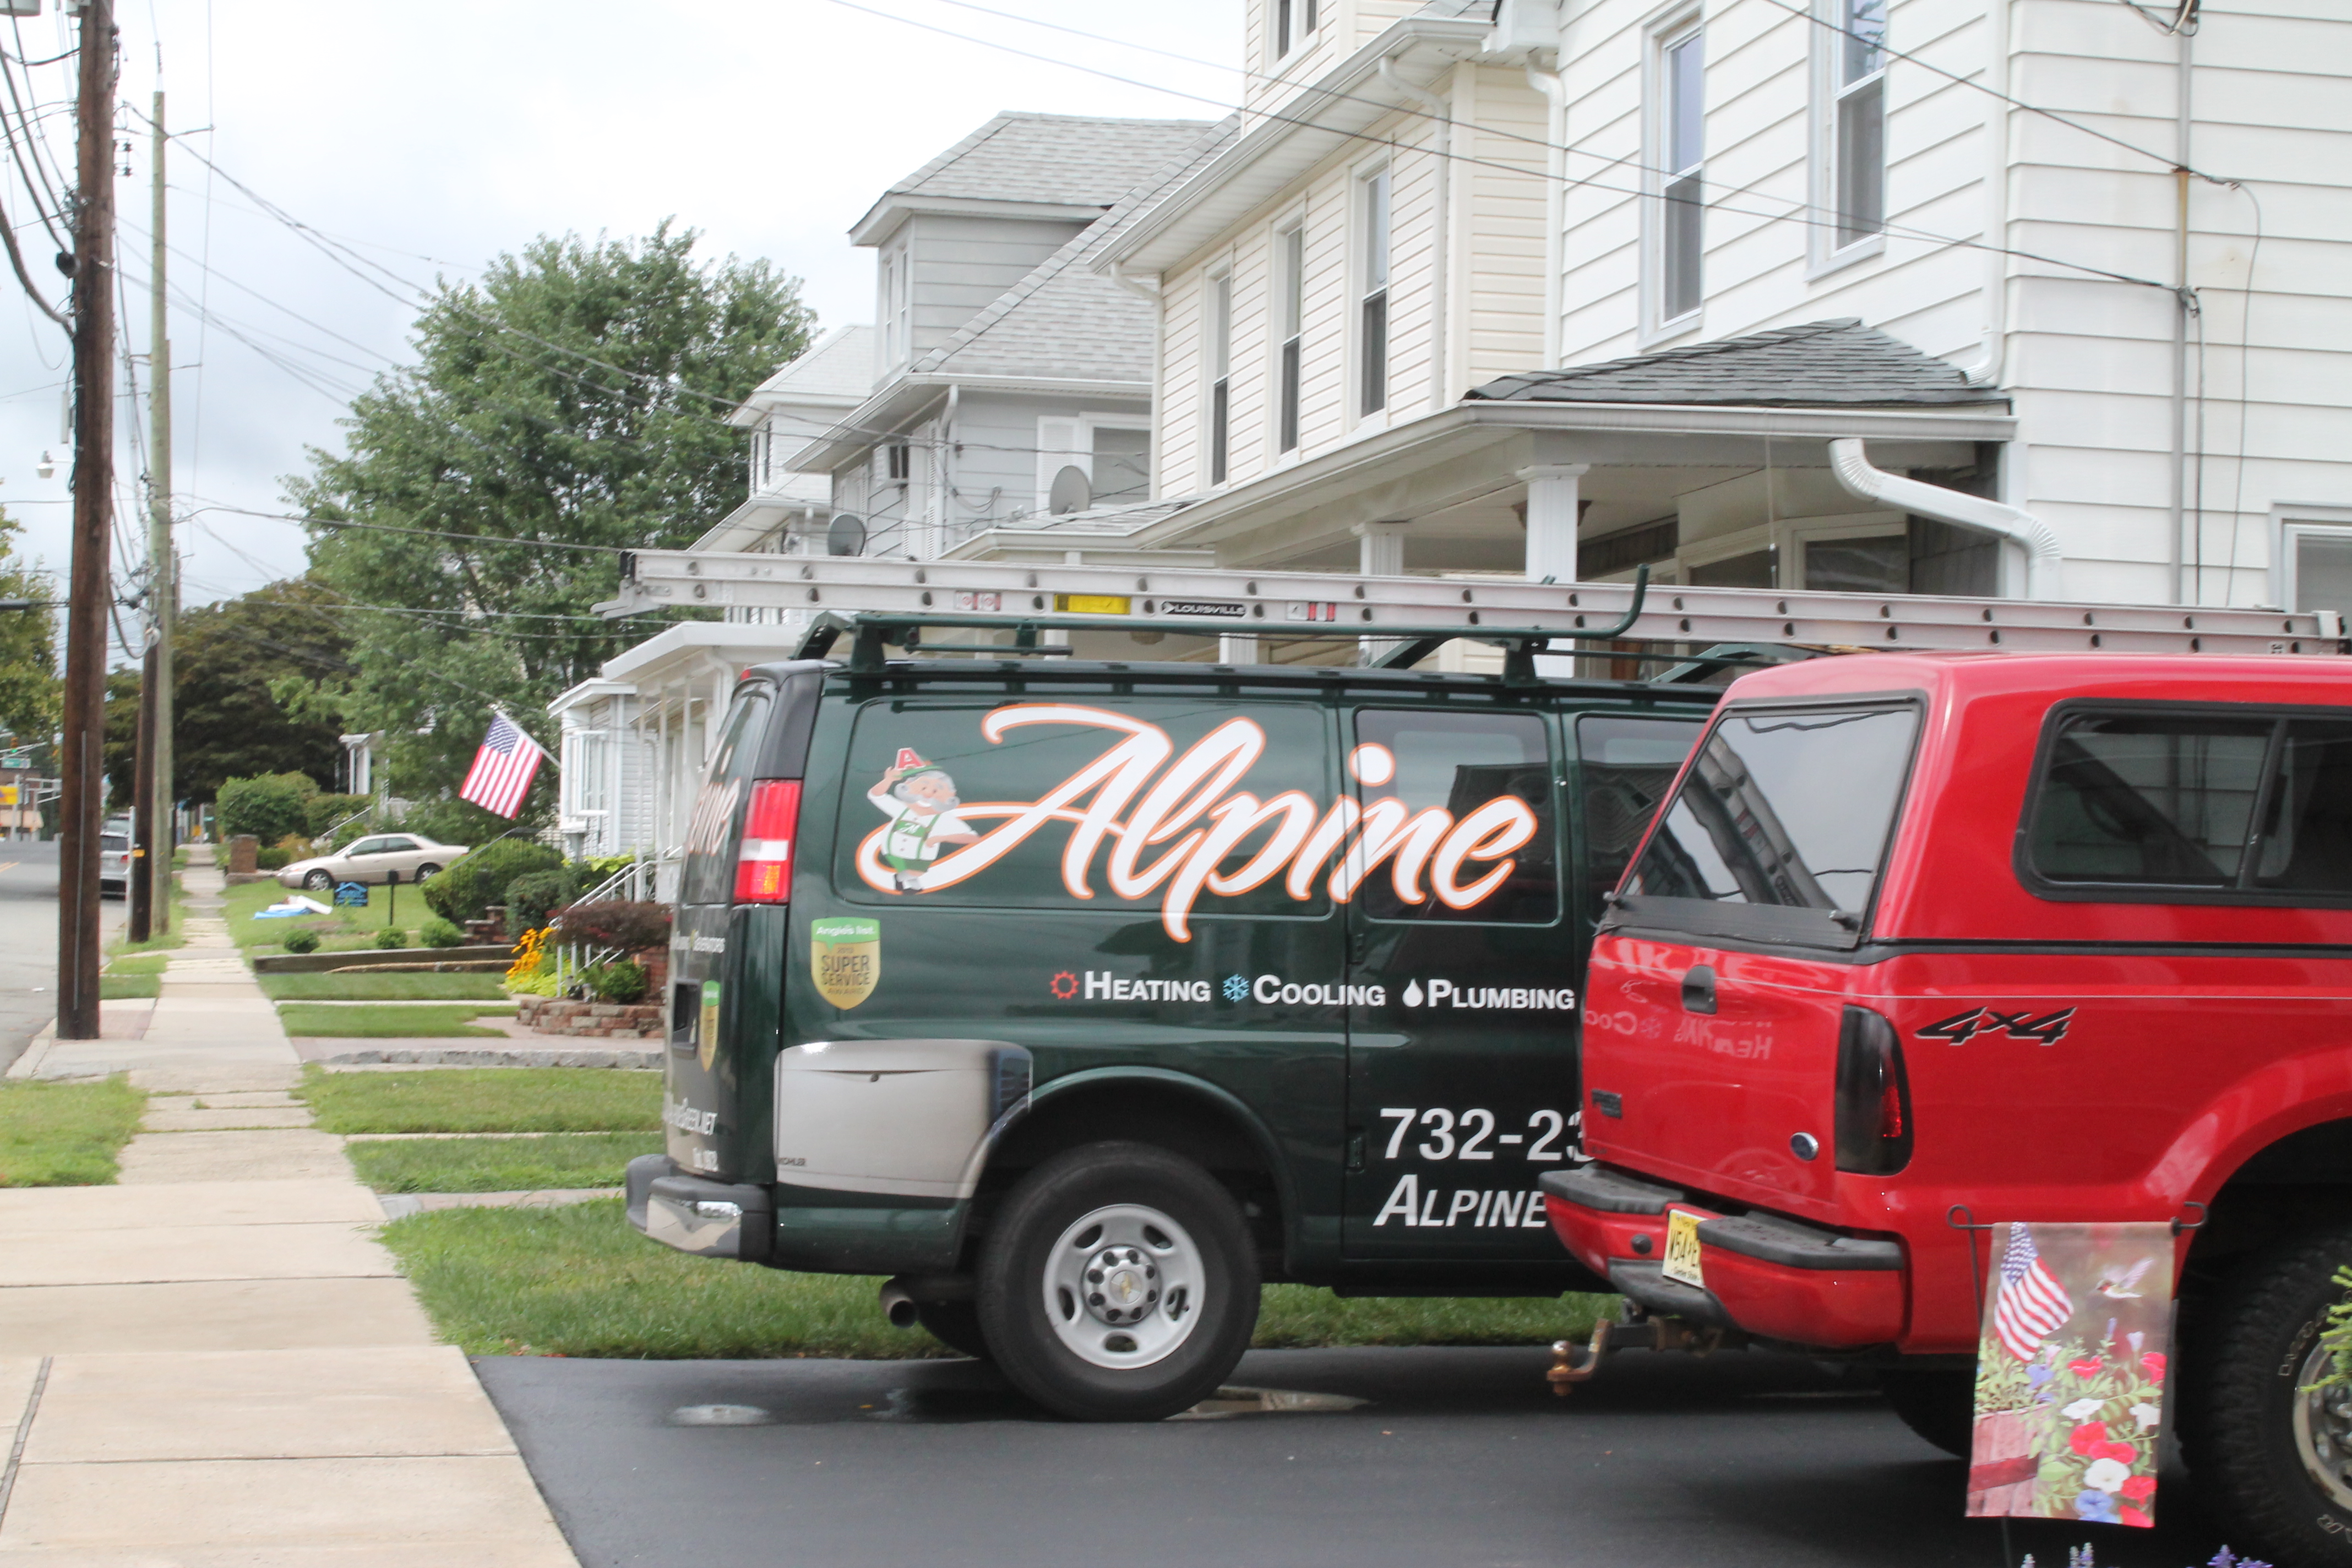 Always ready to service your heating and cooling needs.